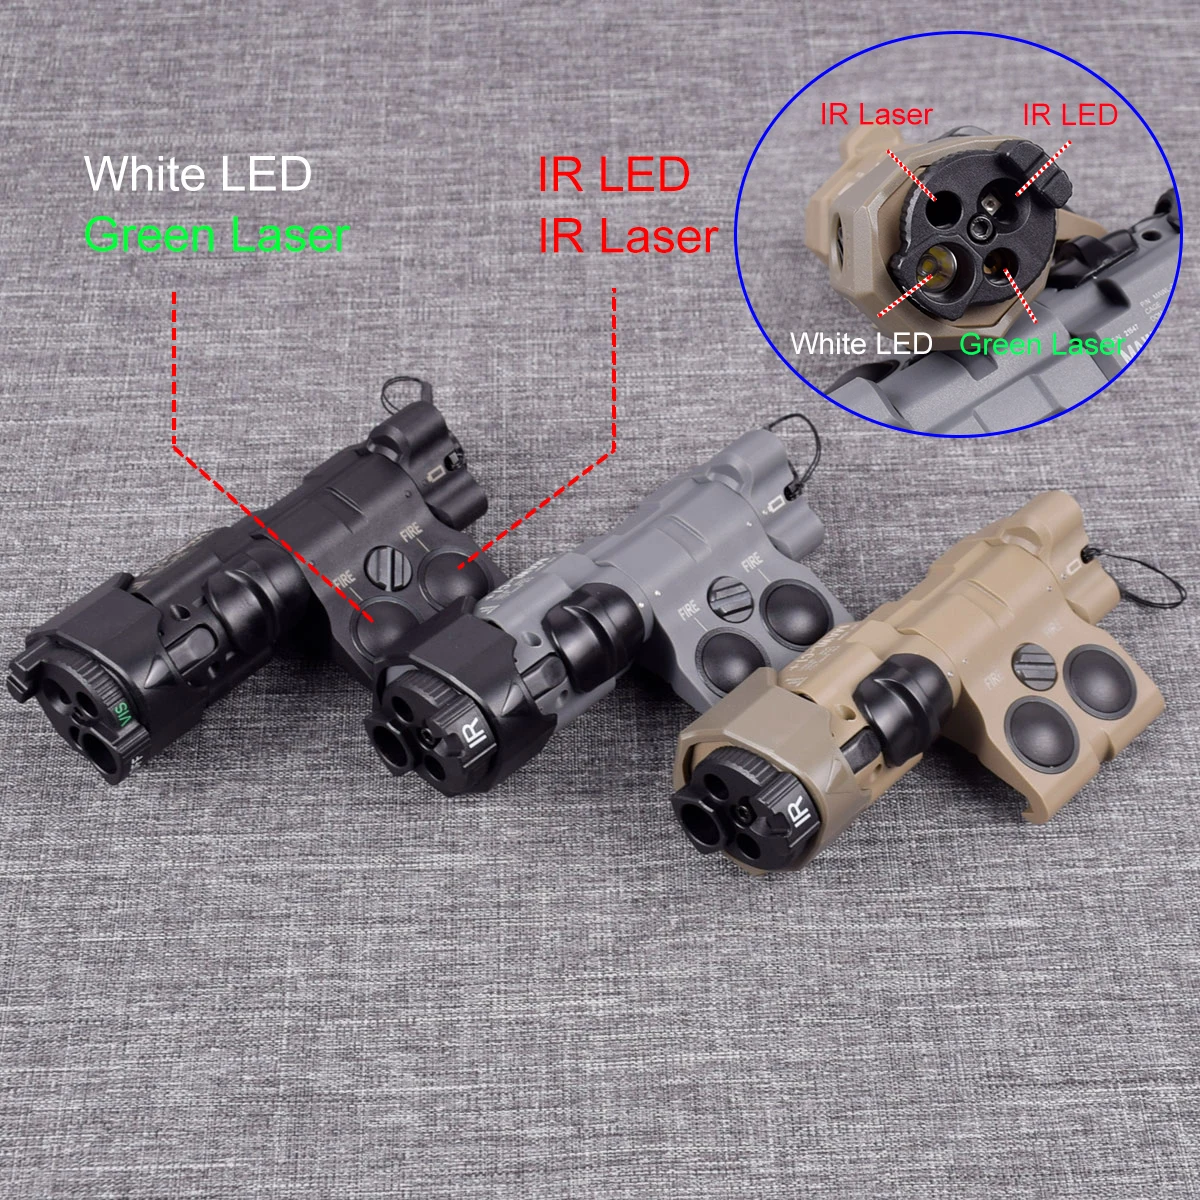 

Tactical New Nylon MAWL MAWL-C1 Laser Aiming Device With White LED Green LASER IR LASER IR LED For Airsoft Riflle AR15 M4 M16